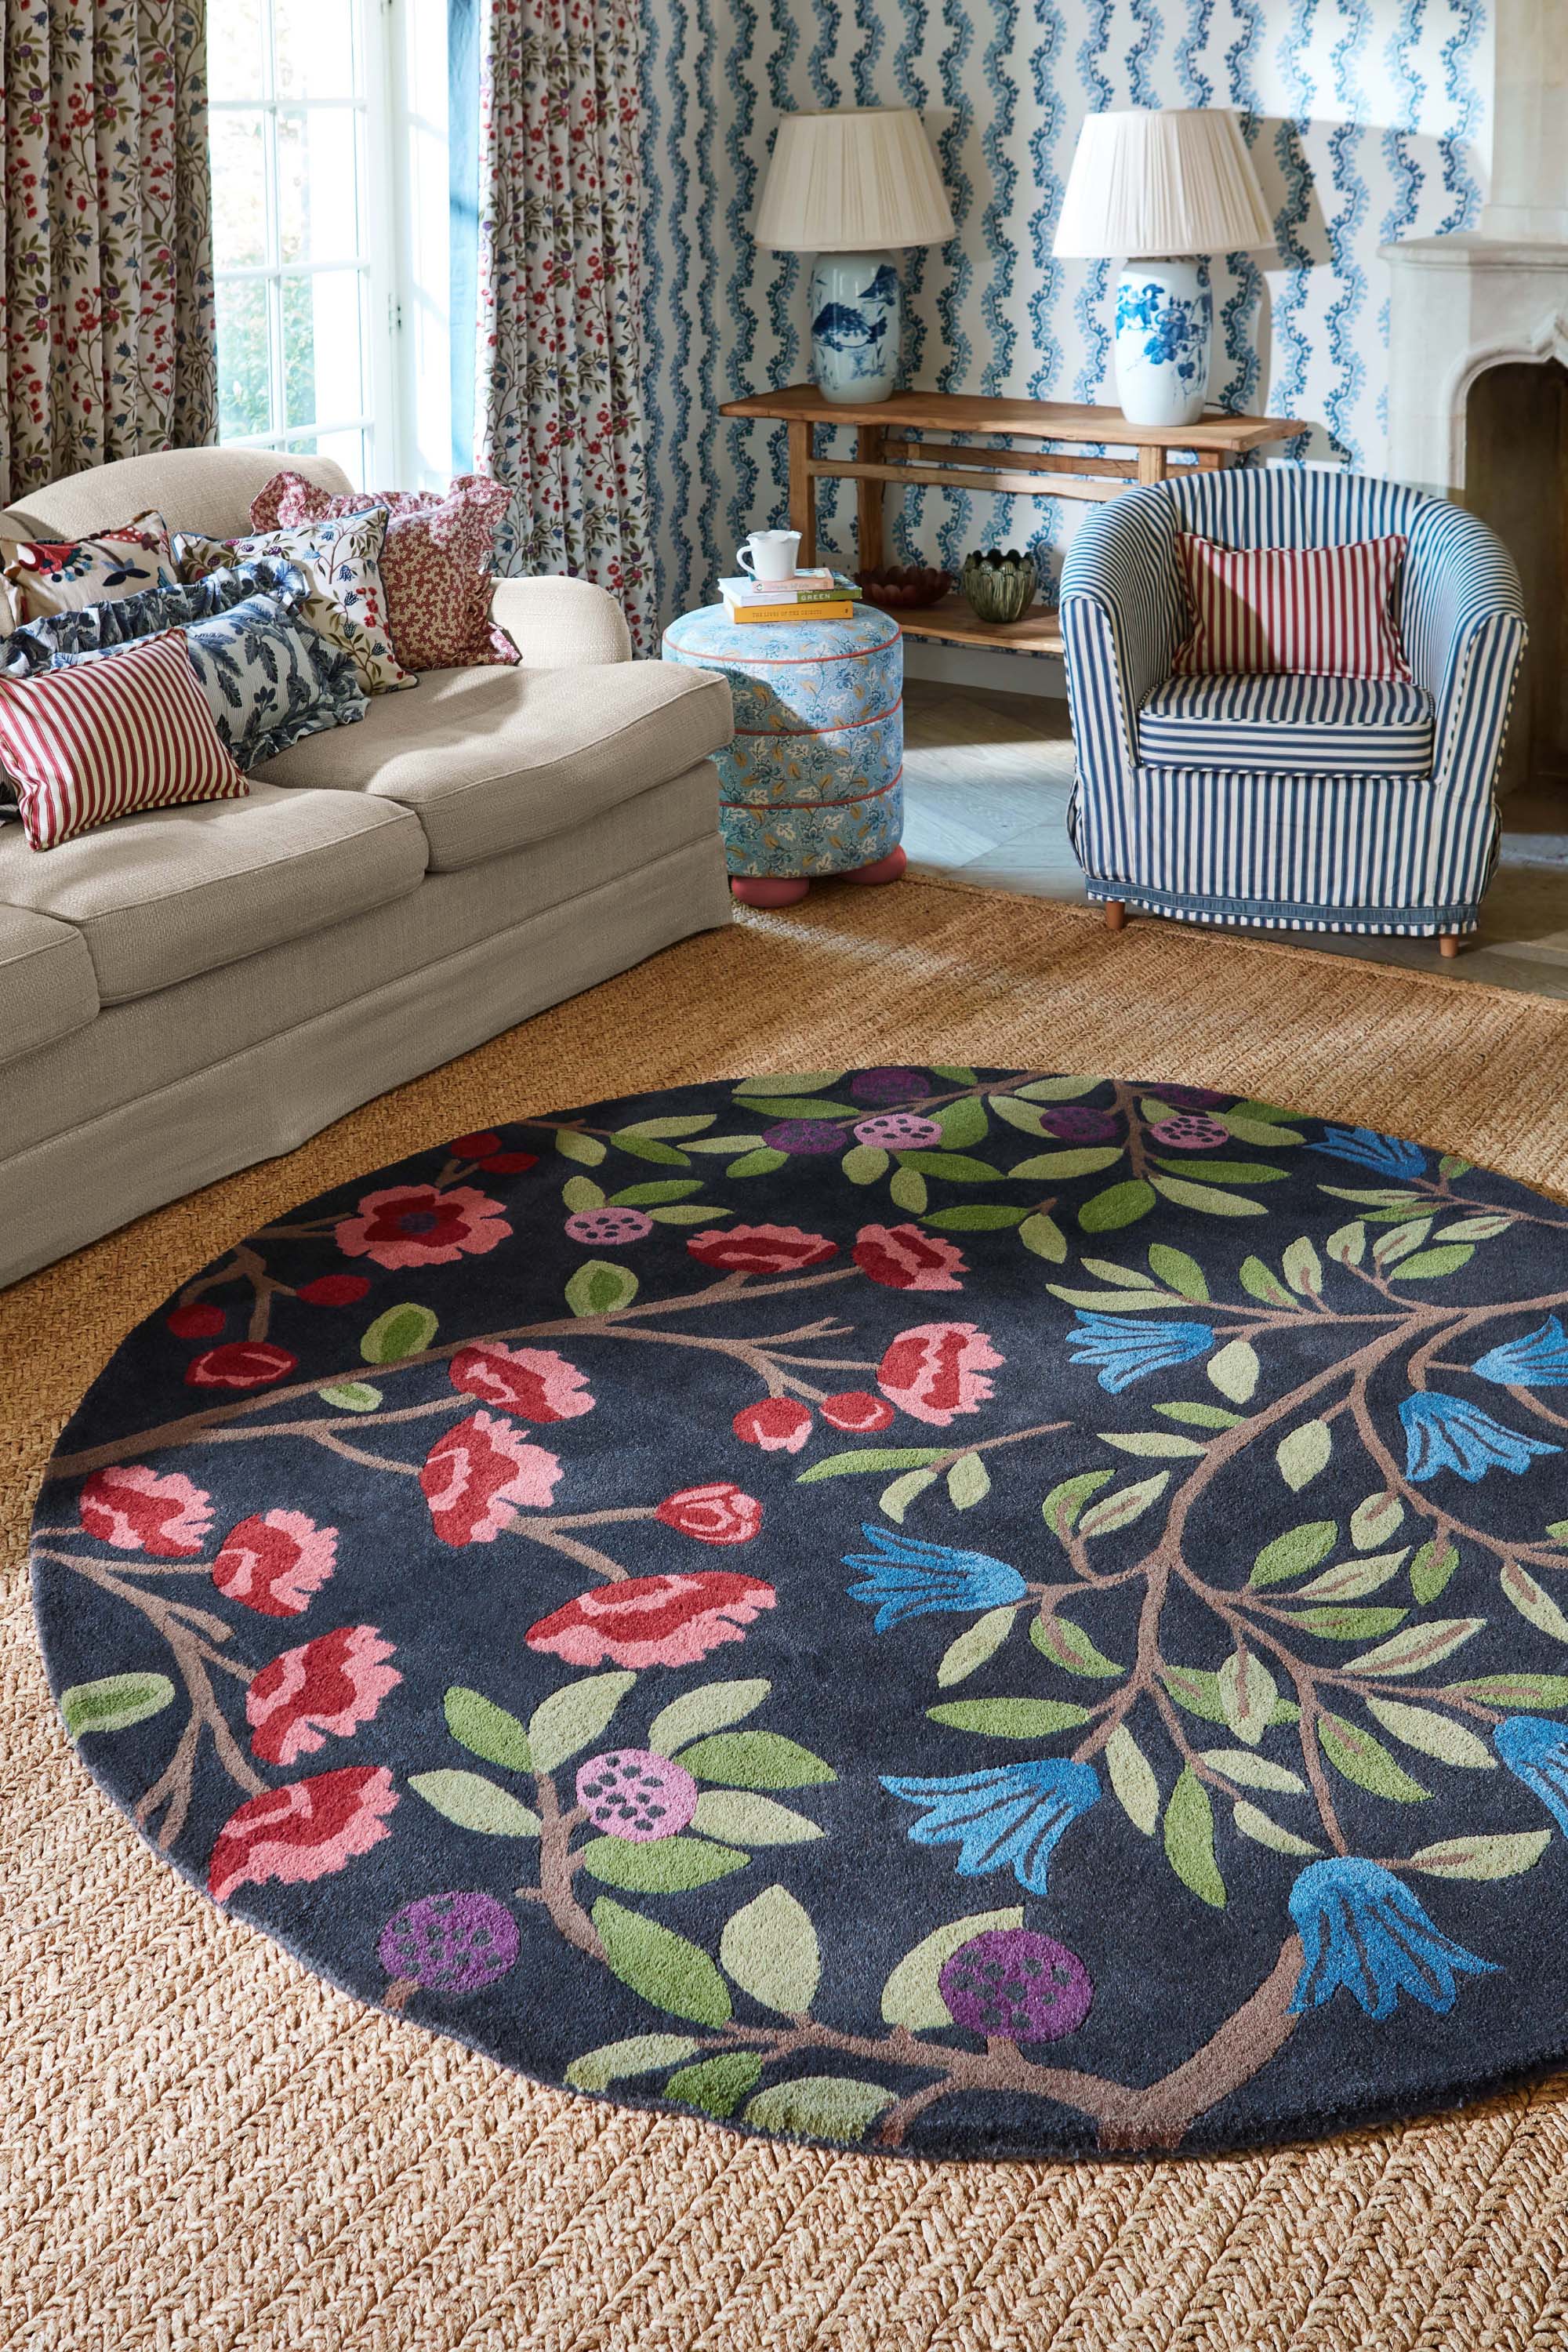 Modern circle rug with floral pattern in blue and natural tones